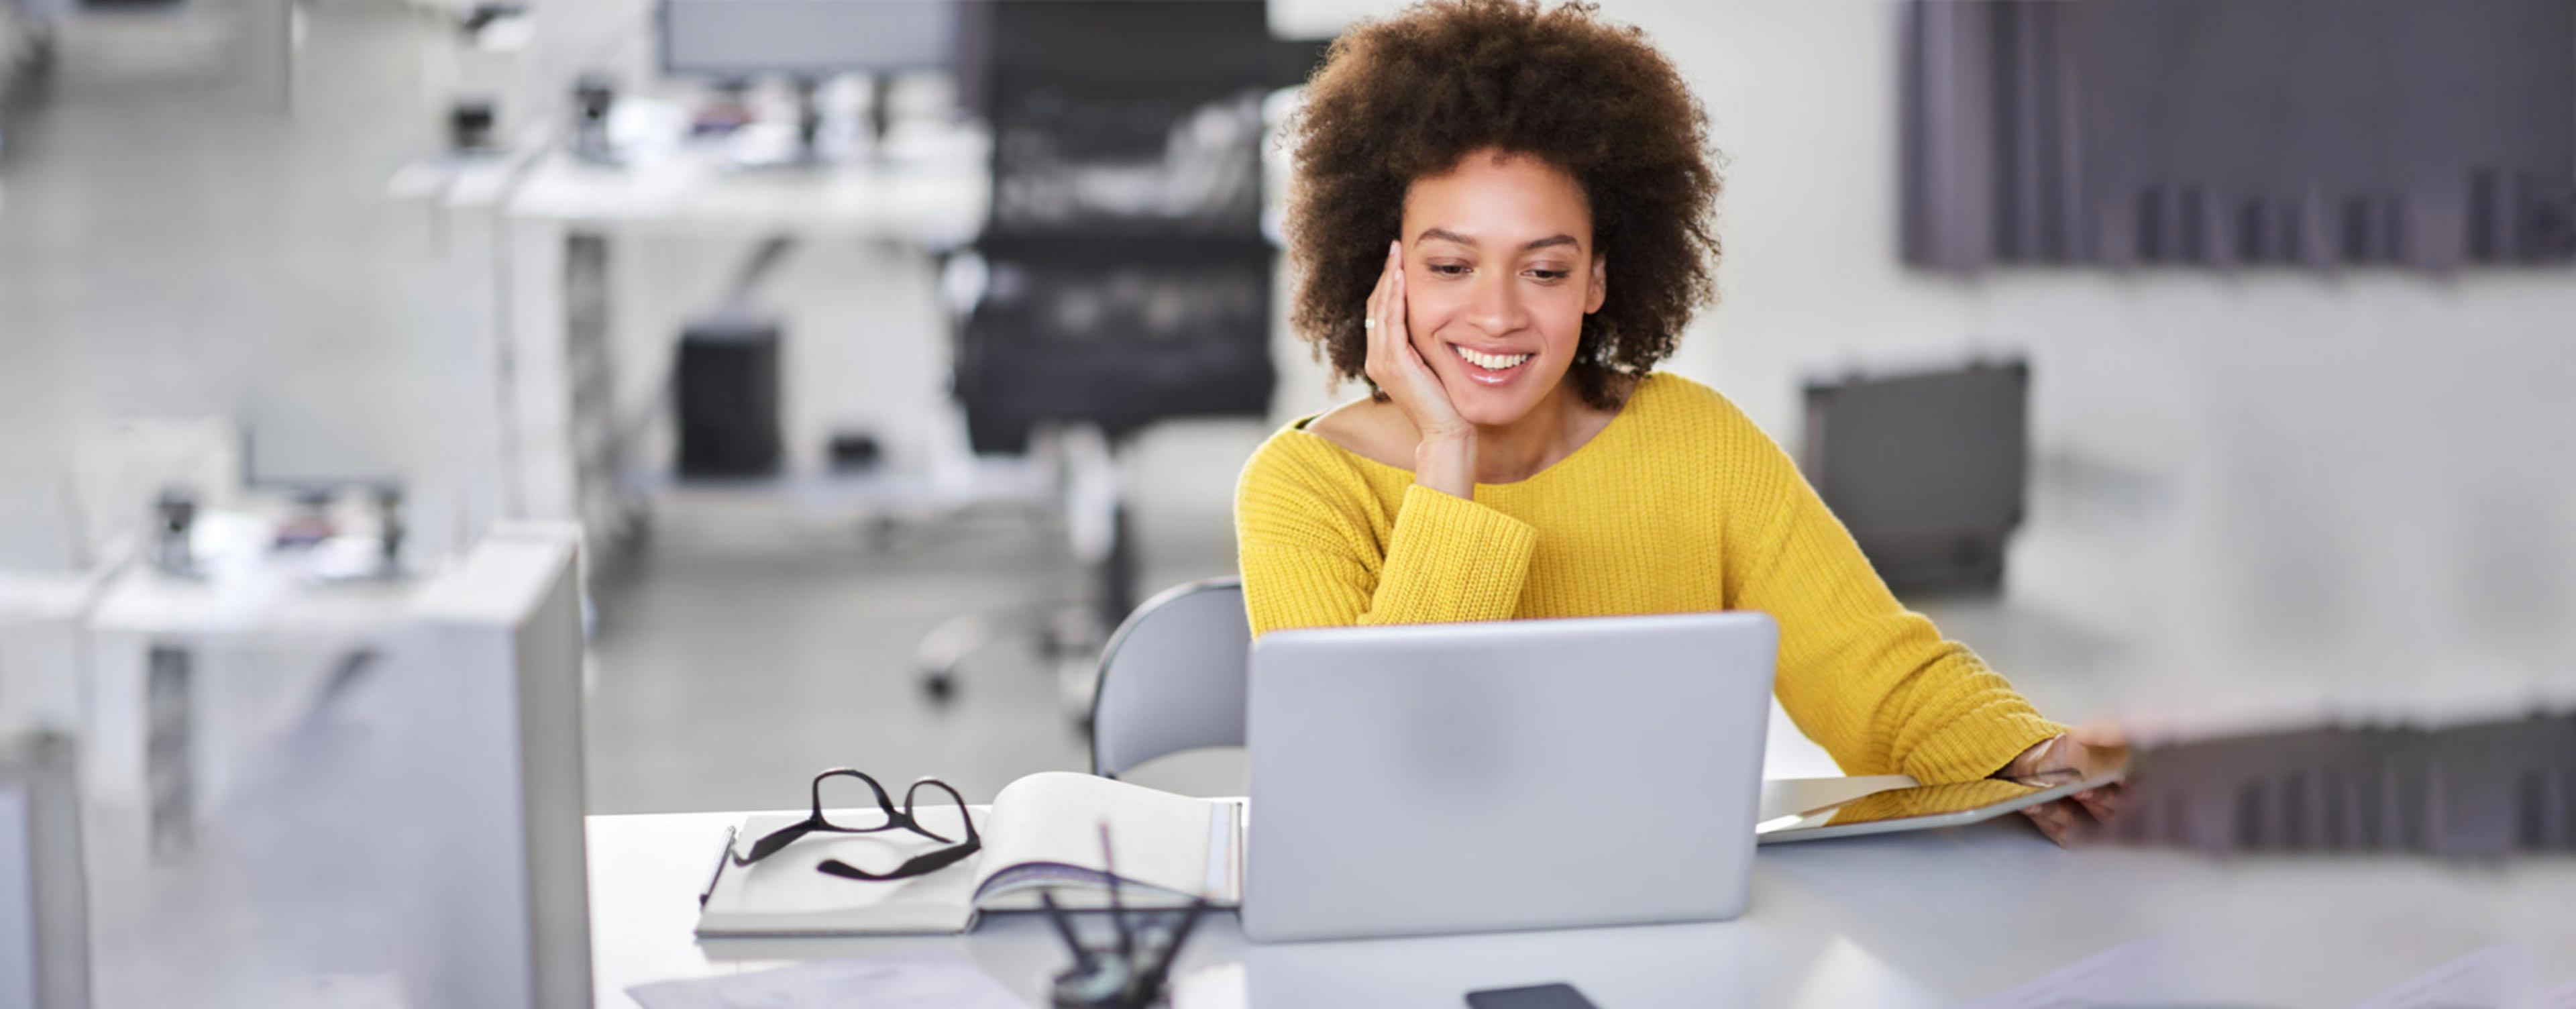 Beautiful woman wearing yellow sweater sits at office desk smiling at her computer